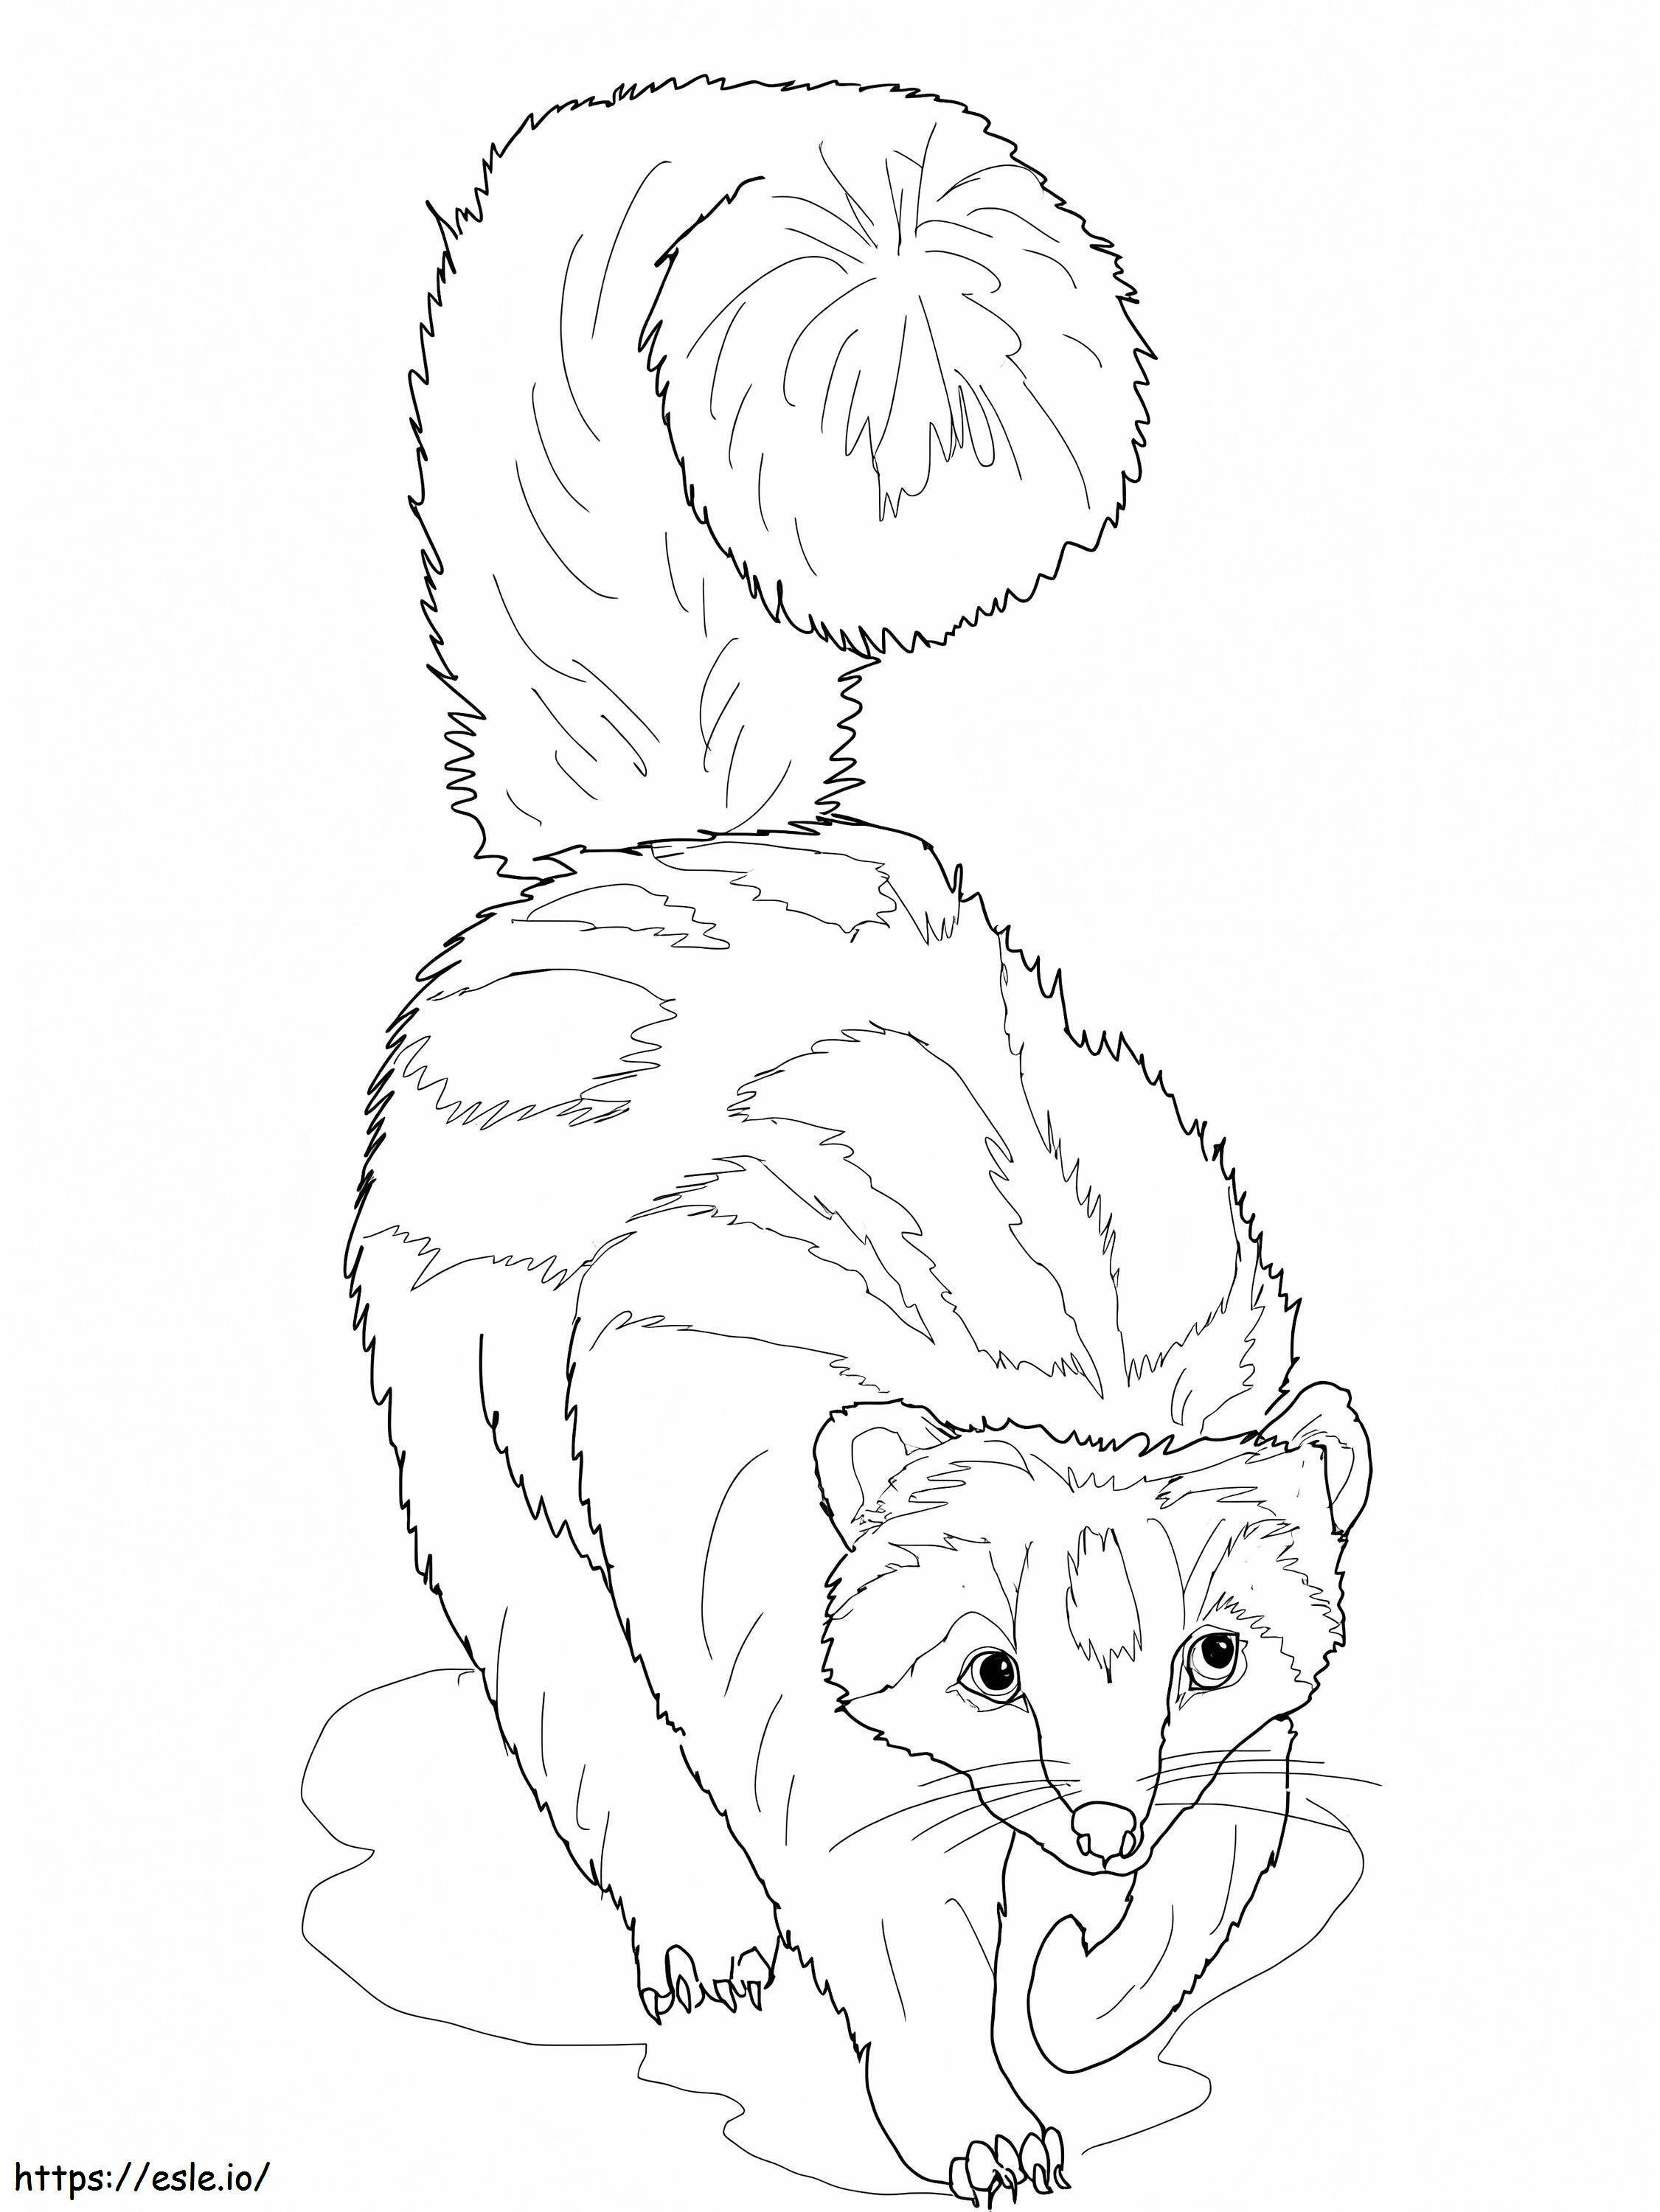 Striped Ferret coloring page